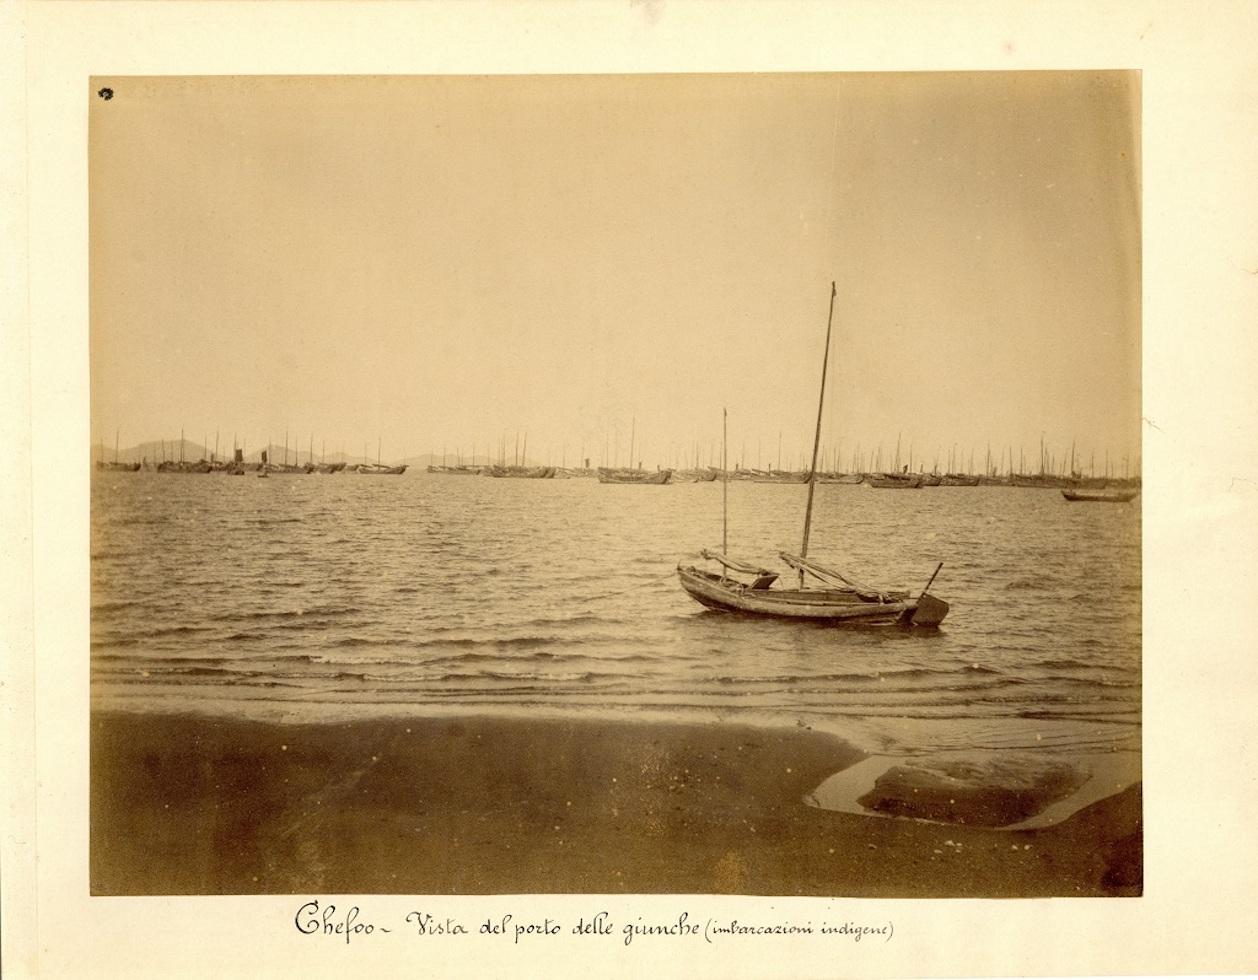 Black and White Photograph Unknown - Chefoo, Harbour of Junks - Ancienne impression d'albumen 1880/1900